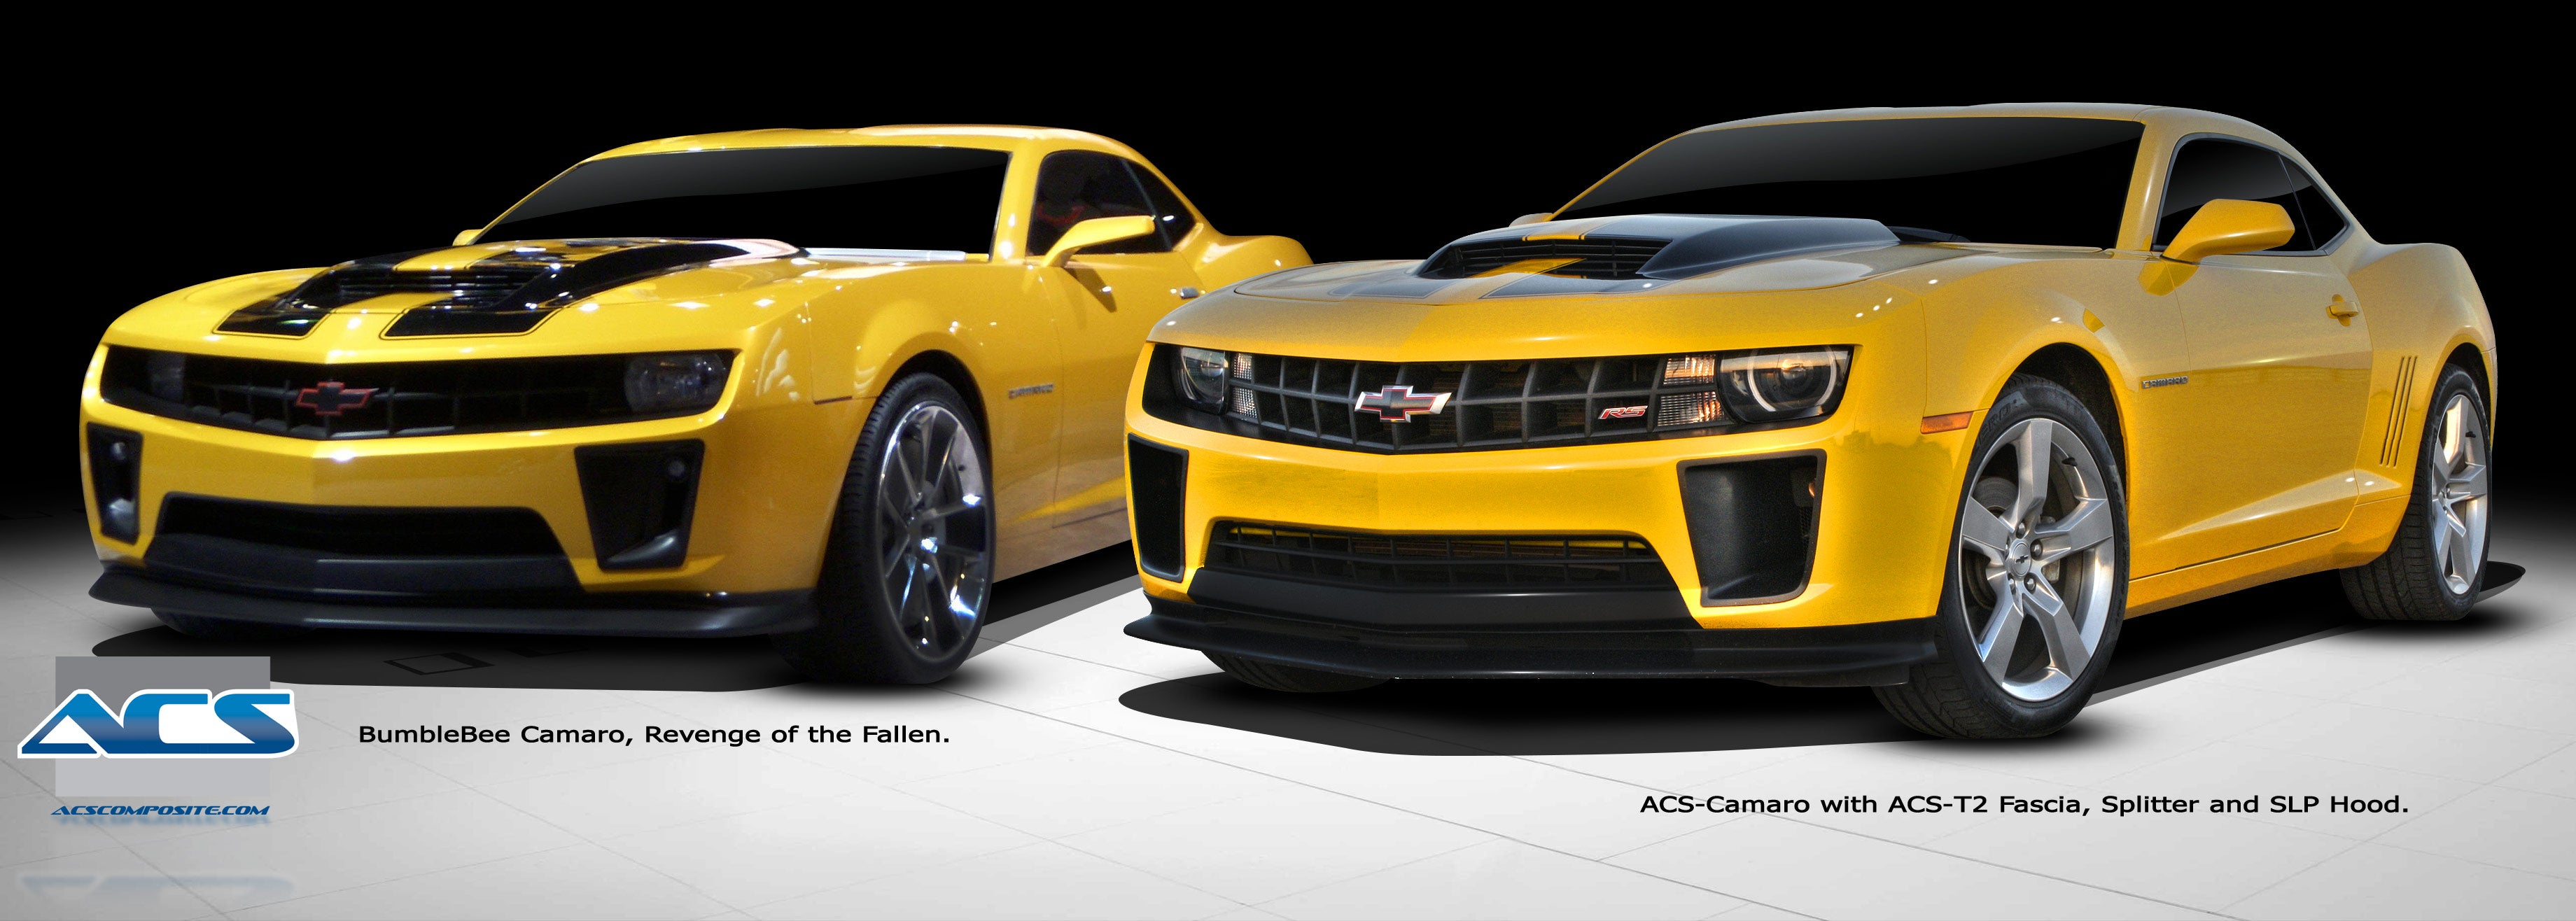 How Chevy's Camaro Changed with the 'Transformers' Franchise